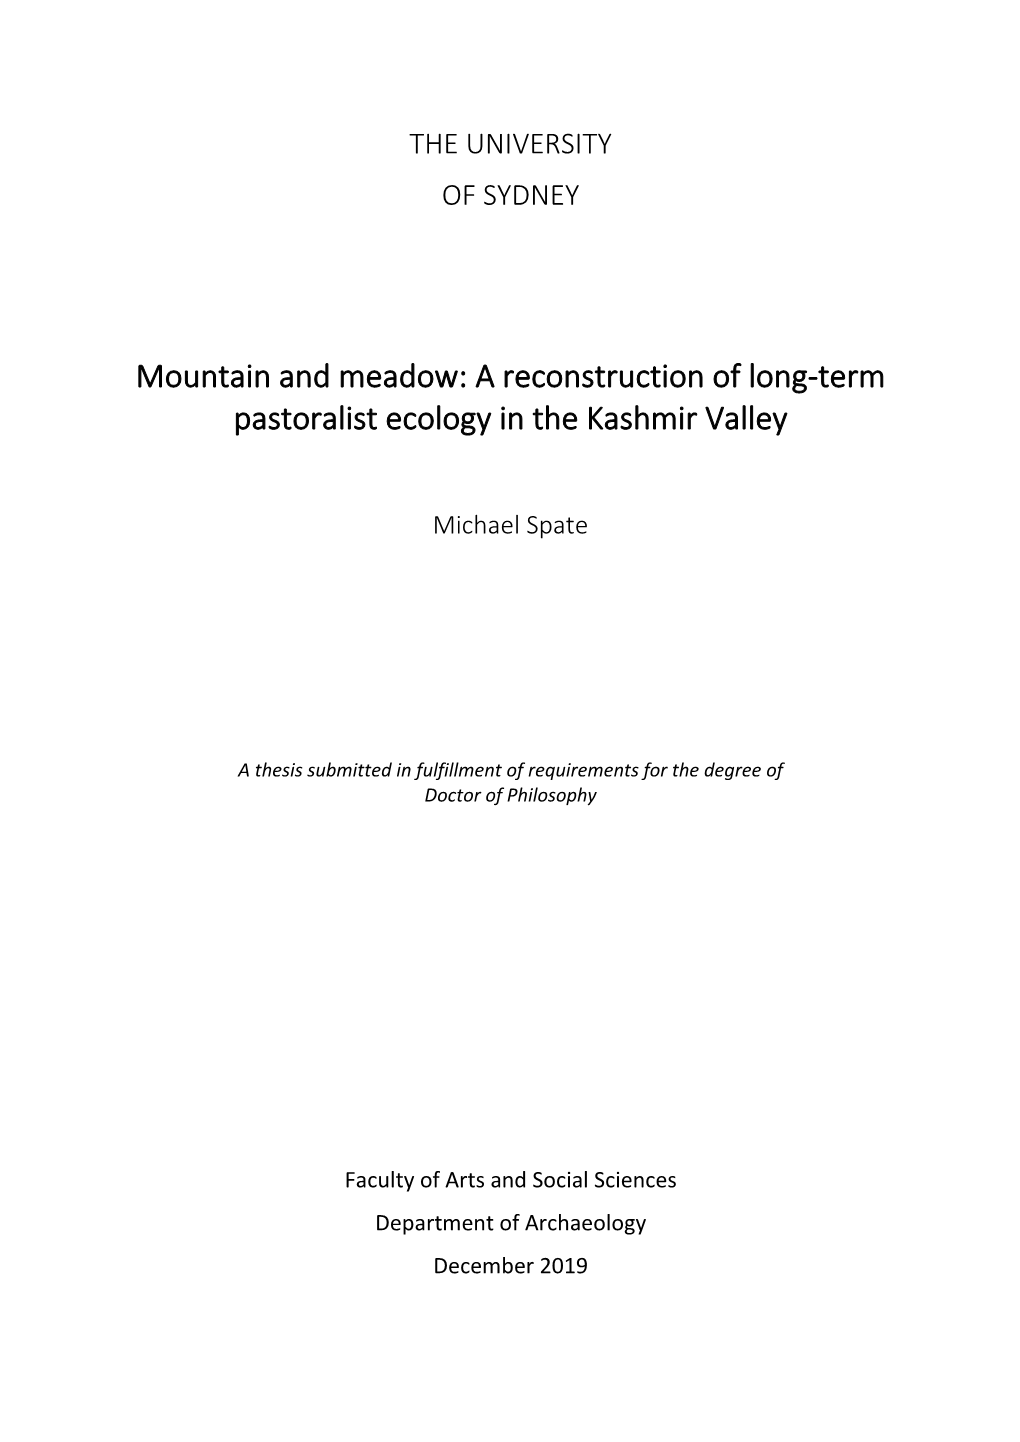 A Reconstruction of Long-Term Pastoralist Ecology in the Kashmir Valley